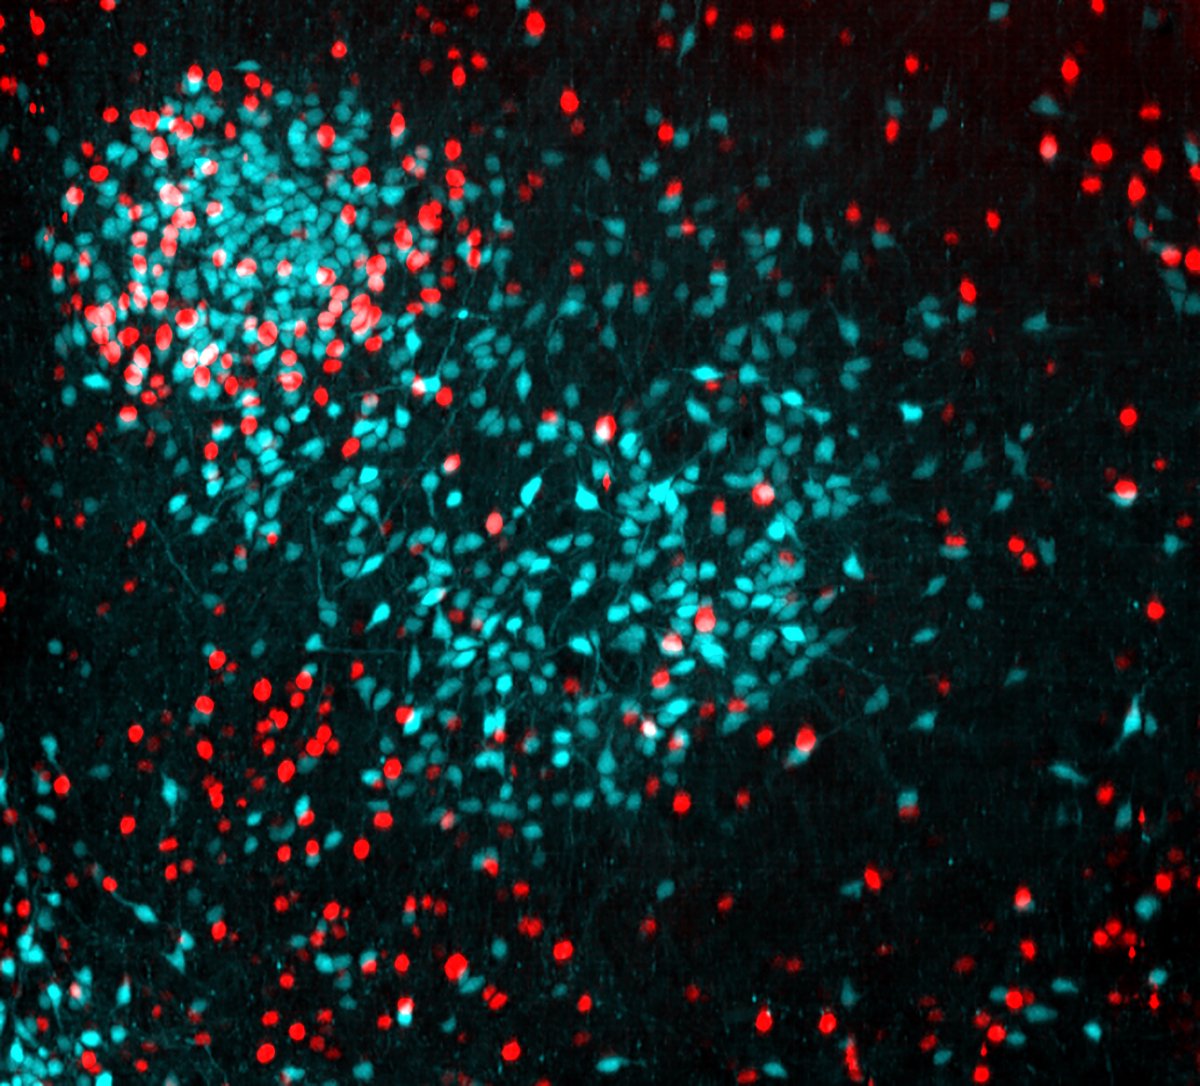 What if I told you this image was captured in a whole, intact brain using a 4x objective on a light sheet microscope? #lightsheet #microscopy #imaging #neurotwitter #Science